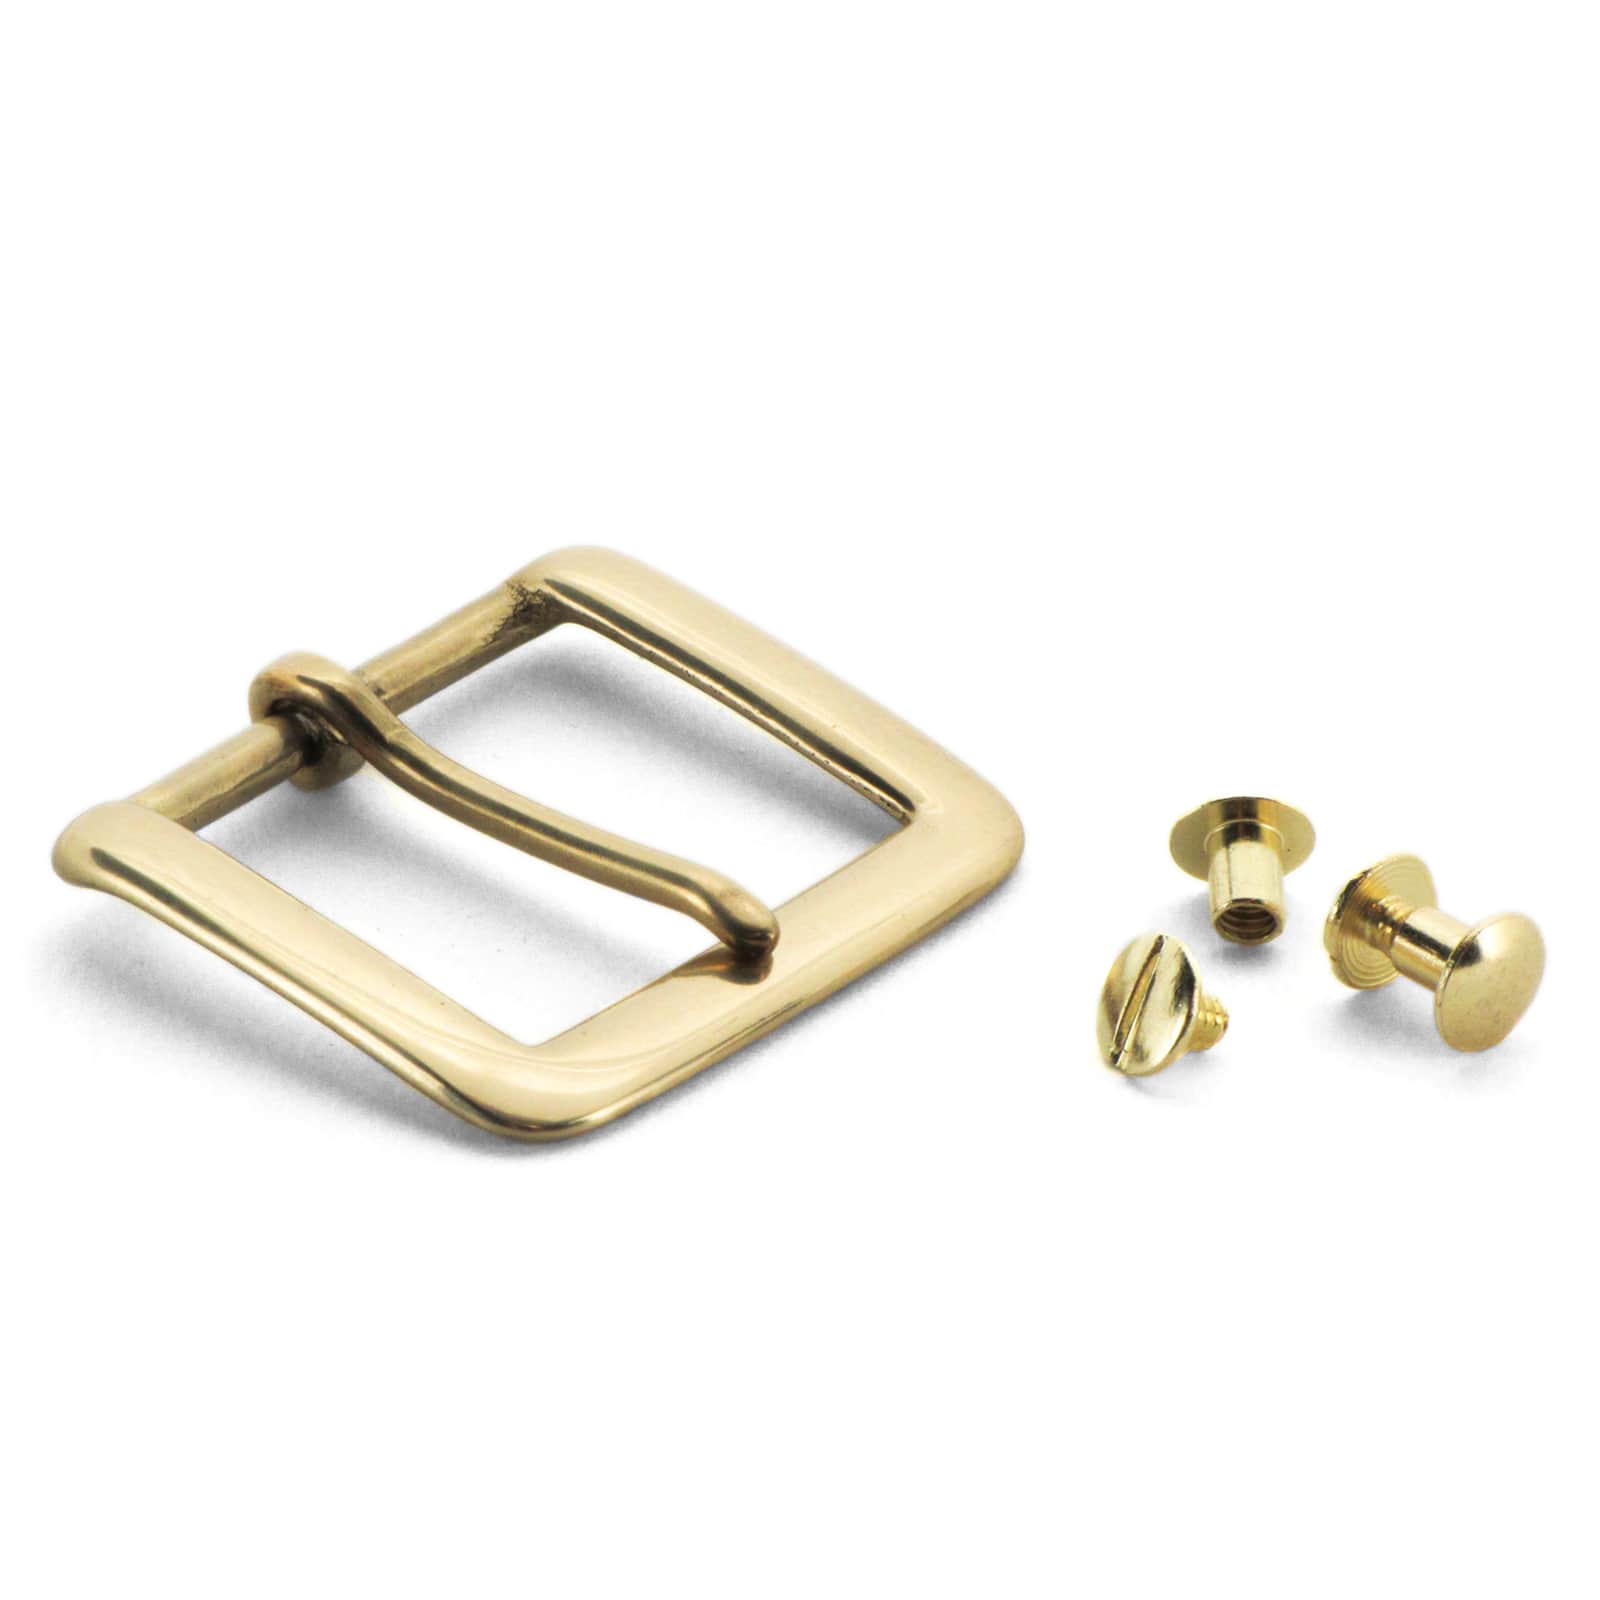 S002B Rectangle Buckle Solid Brass Buckle Center Bar Single Prong Buckle